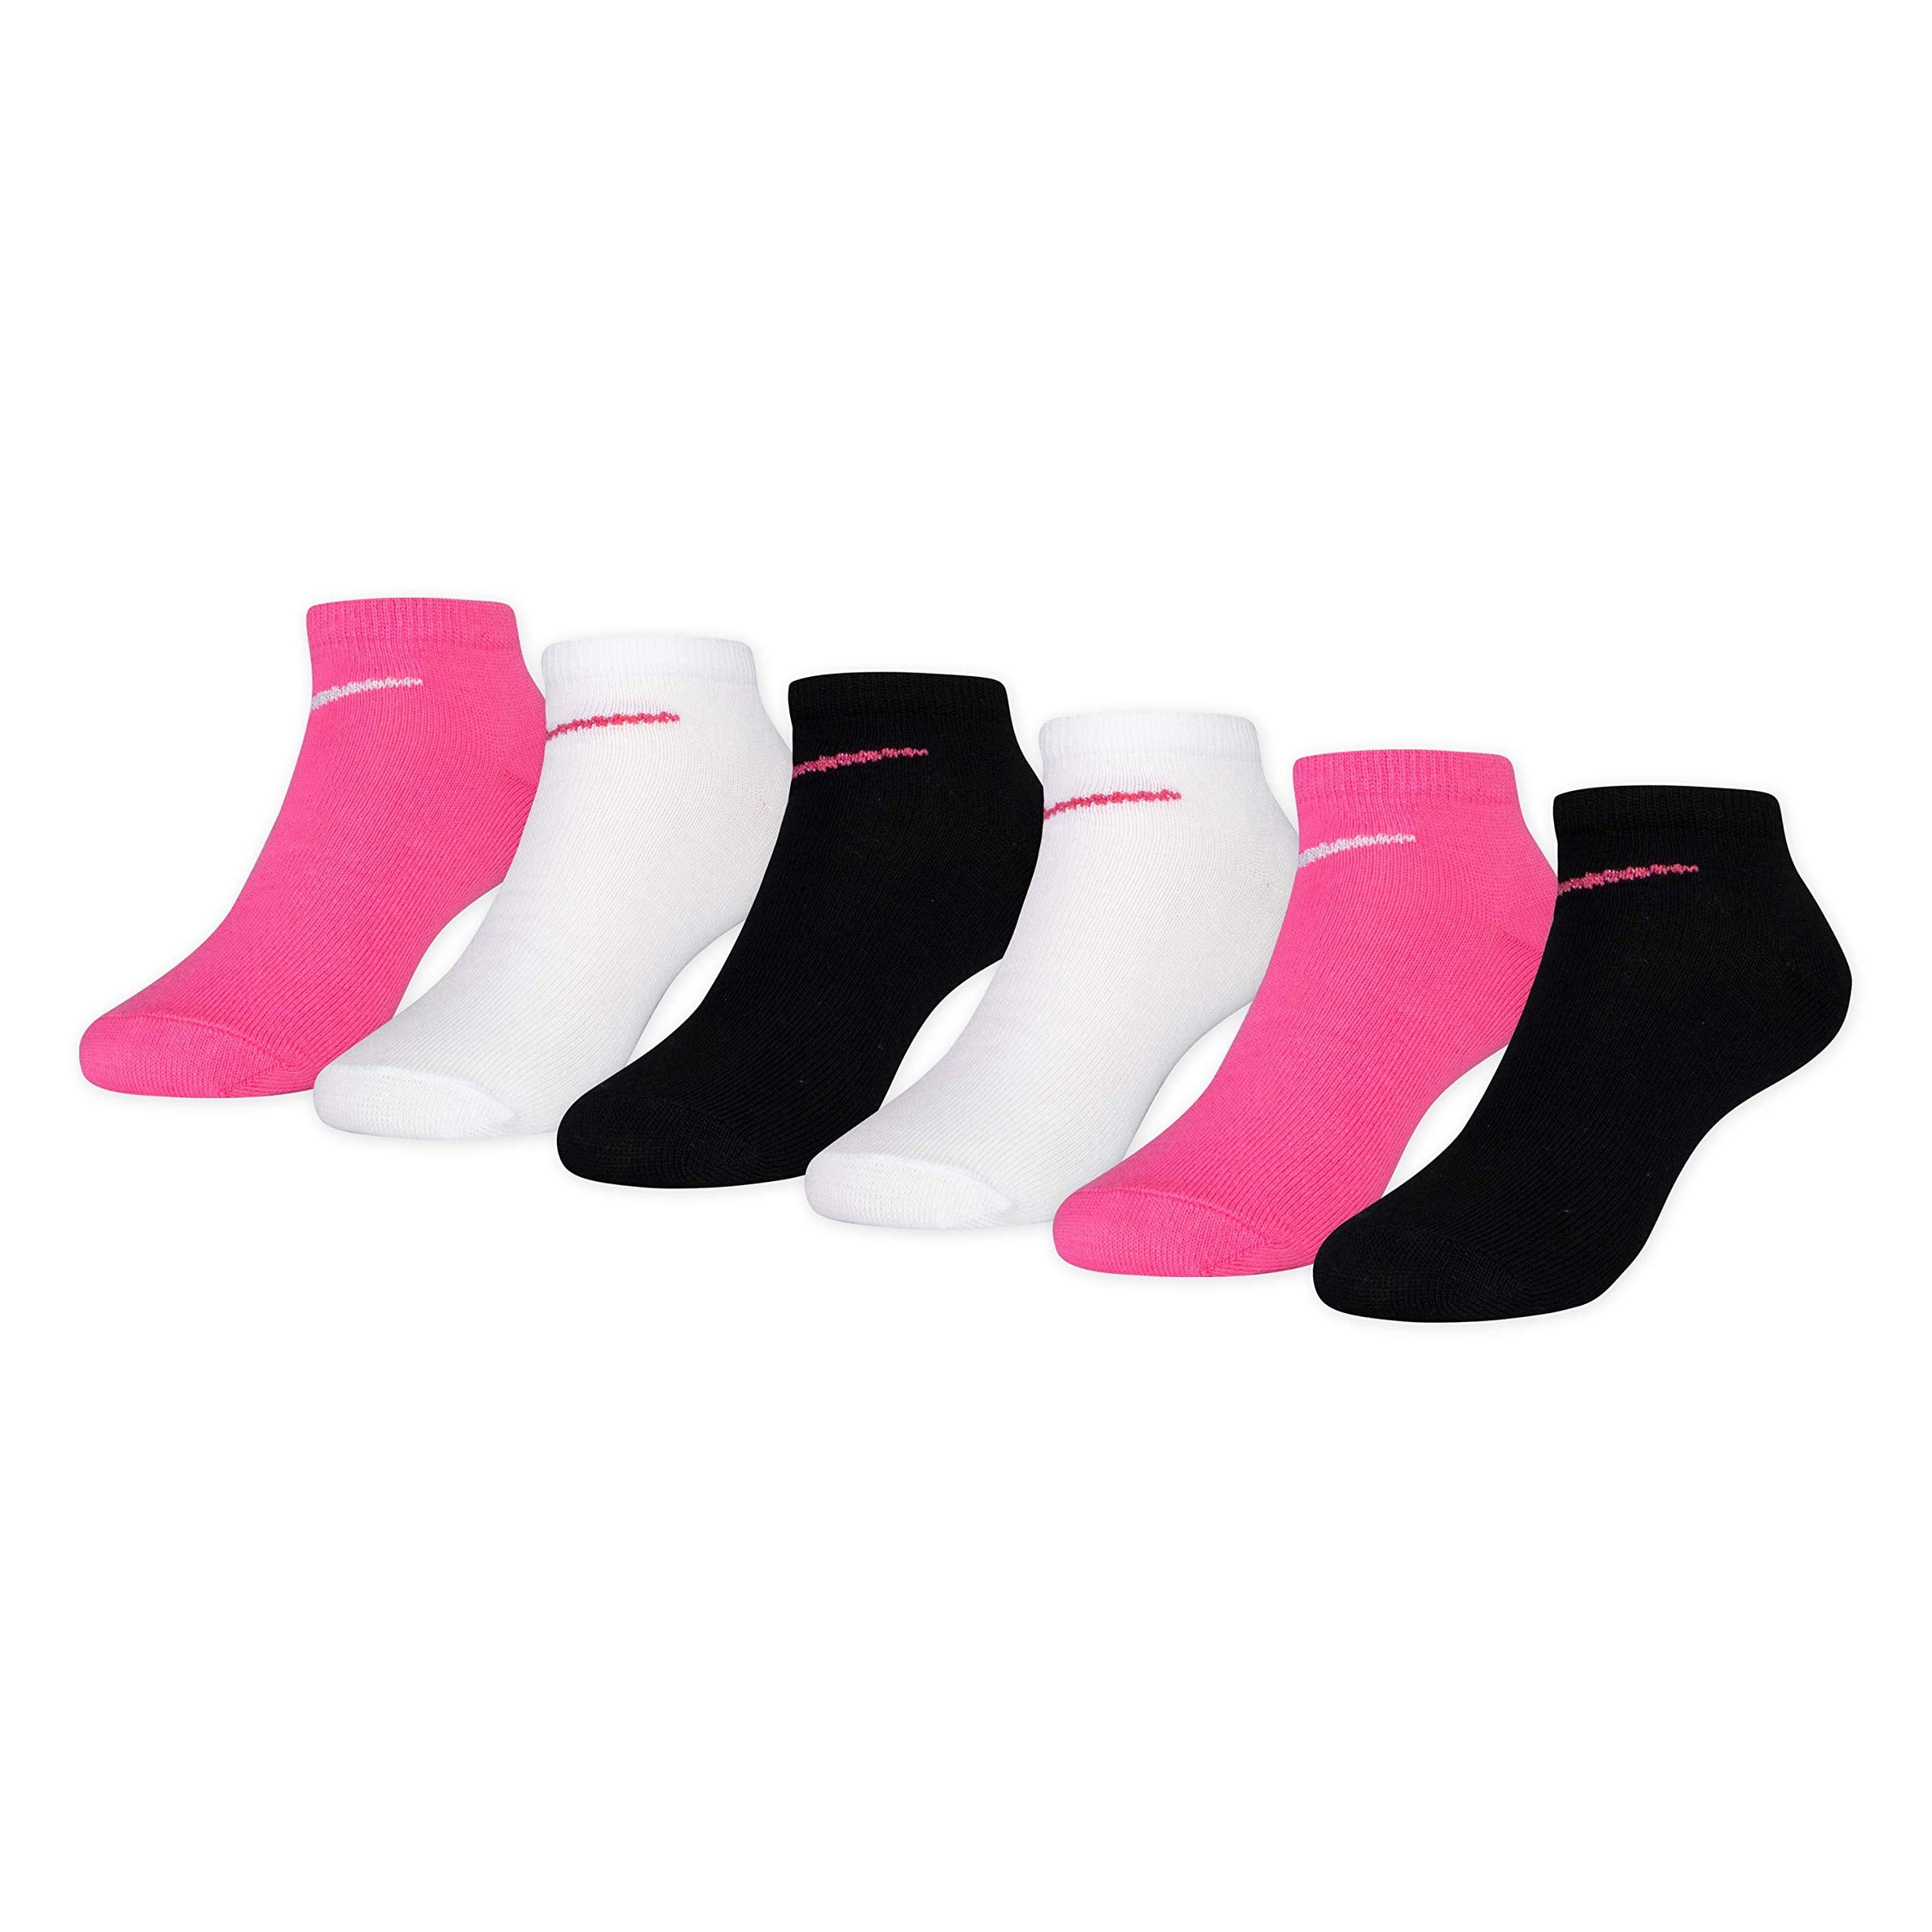 Nike Sportswear ANKLE BABY 6 PACK - Chaussettes - pink/rose